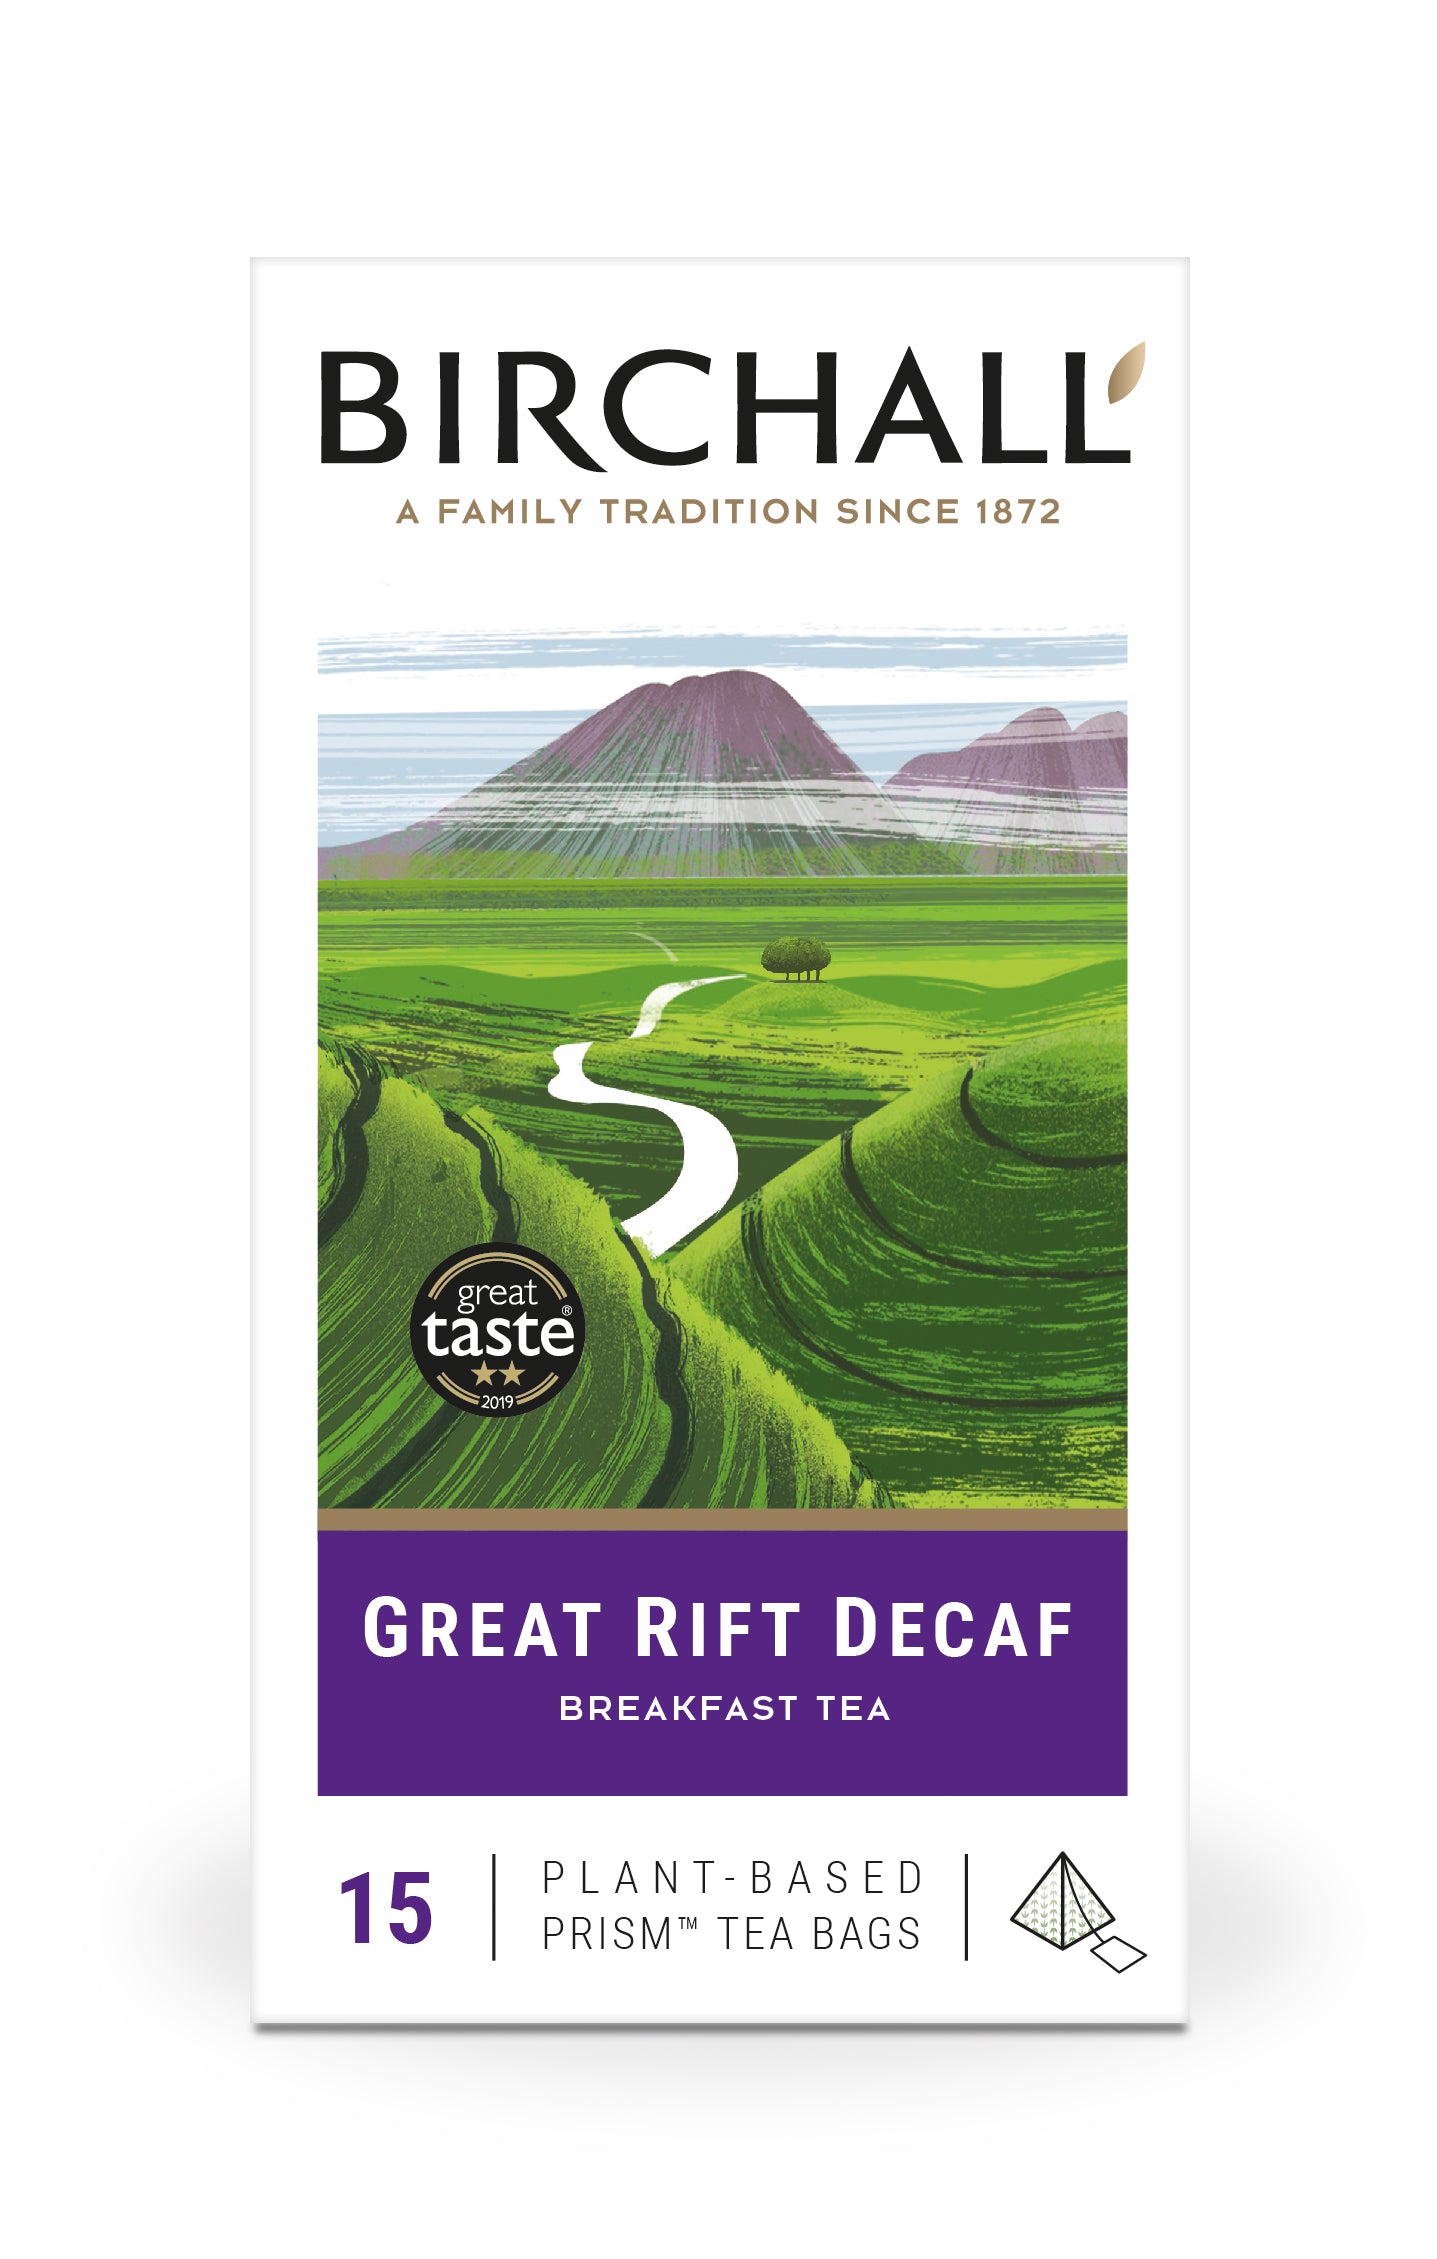 Birchall Great Rift Decaf - 15 Plant-Based Prism Tea Bags